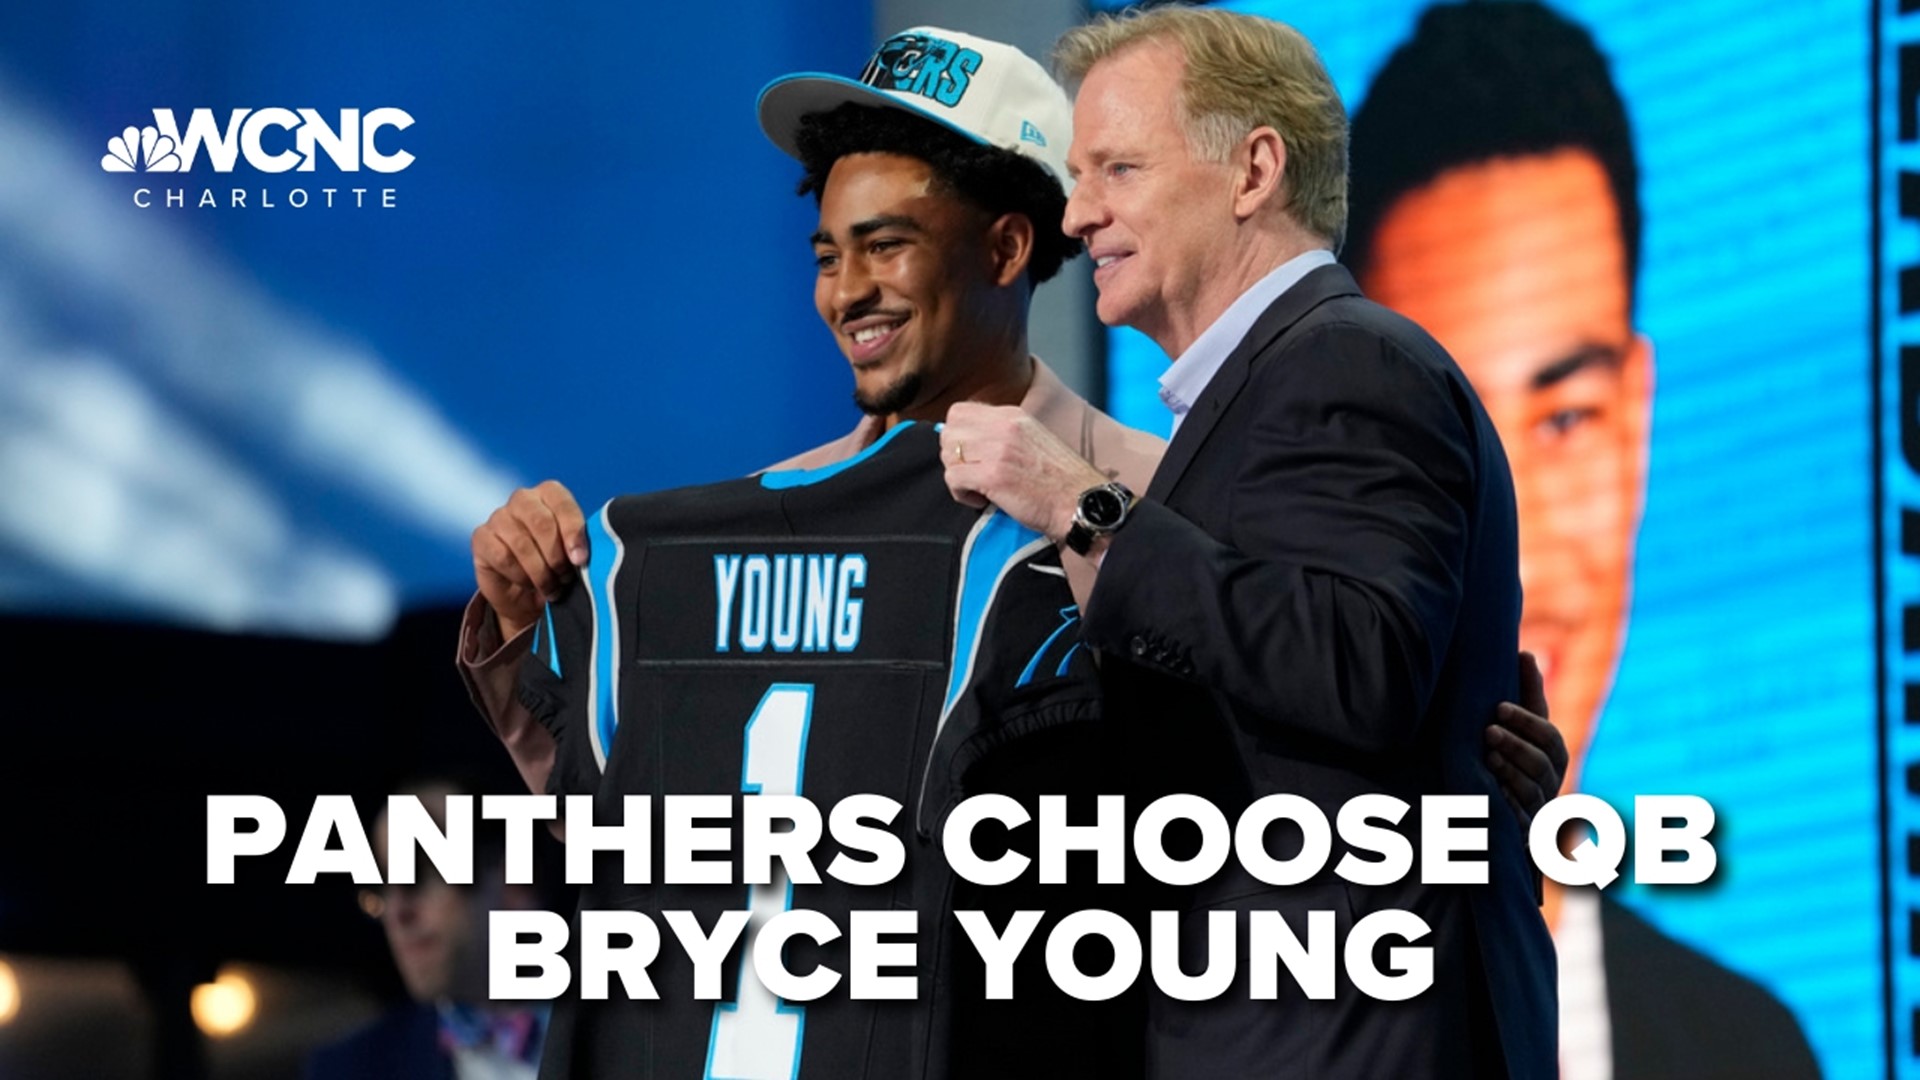 The former Alabama player was chosen to be the next quarterback of the Carolina Panthers.